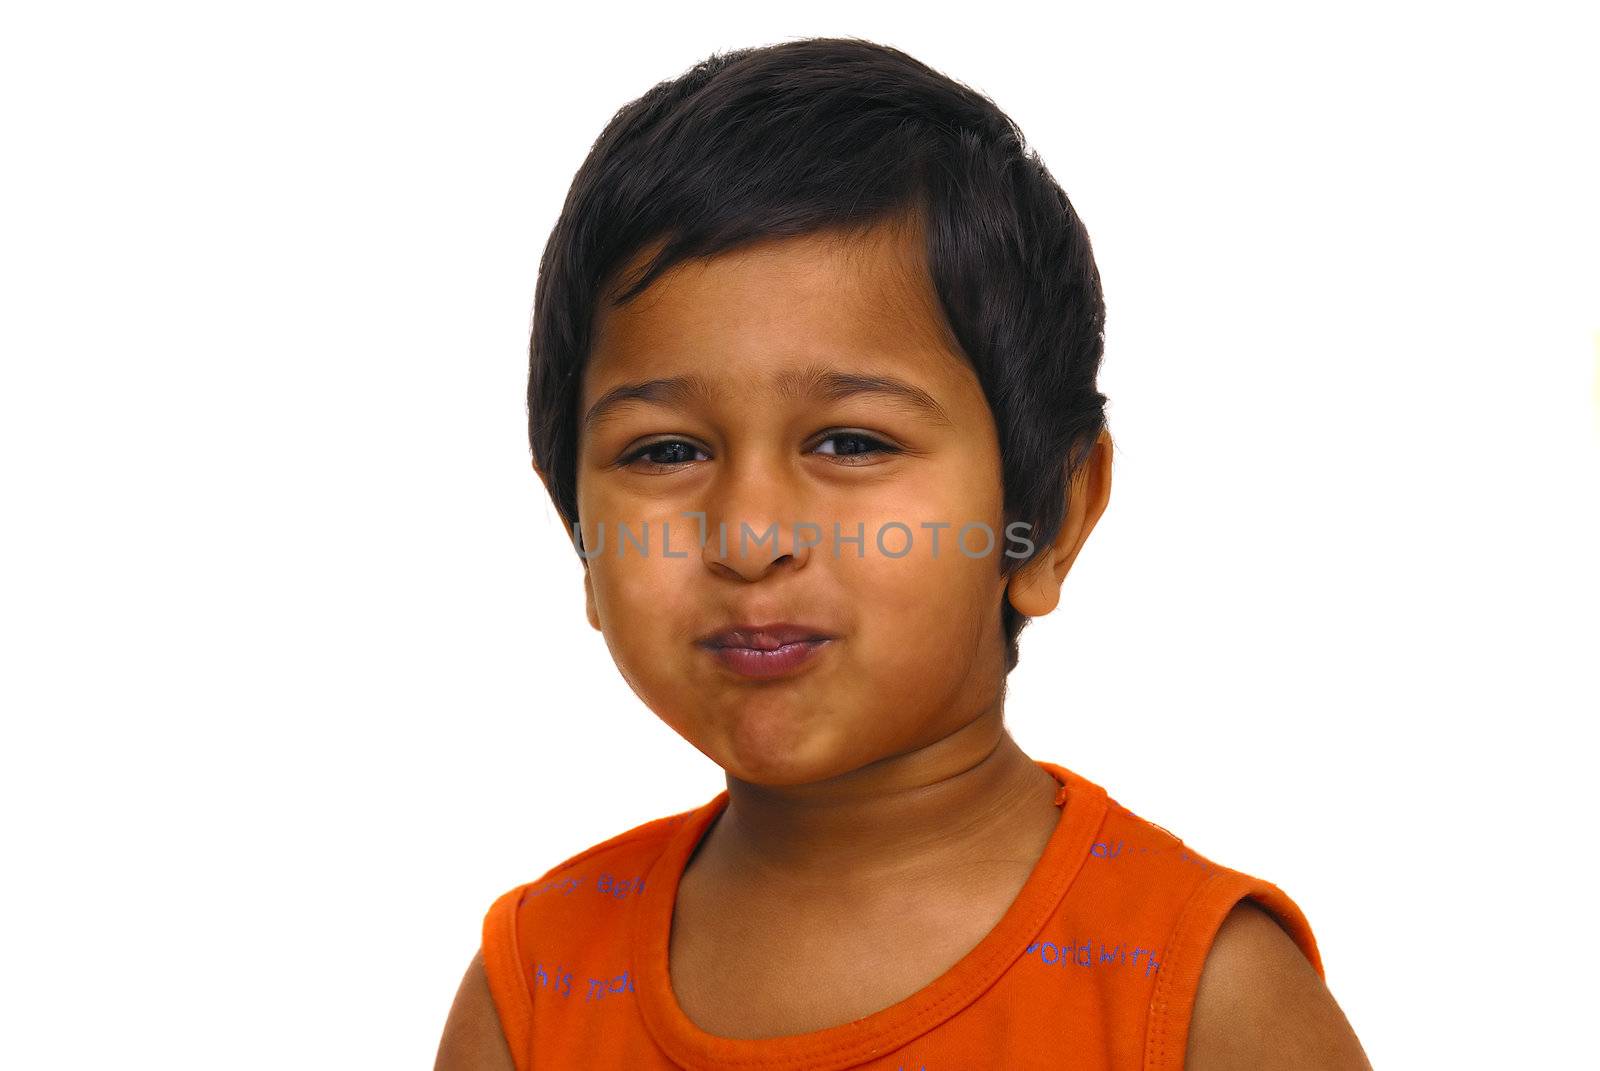 An handsome indian kid playing pranky face